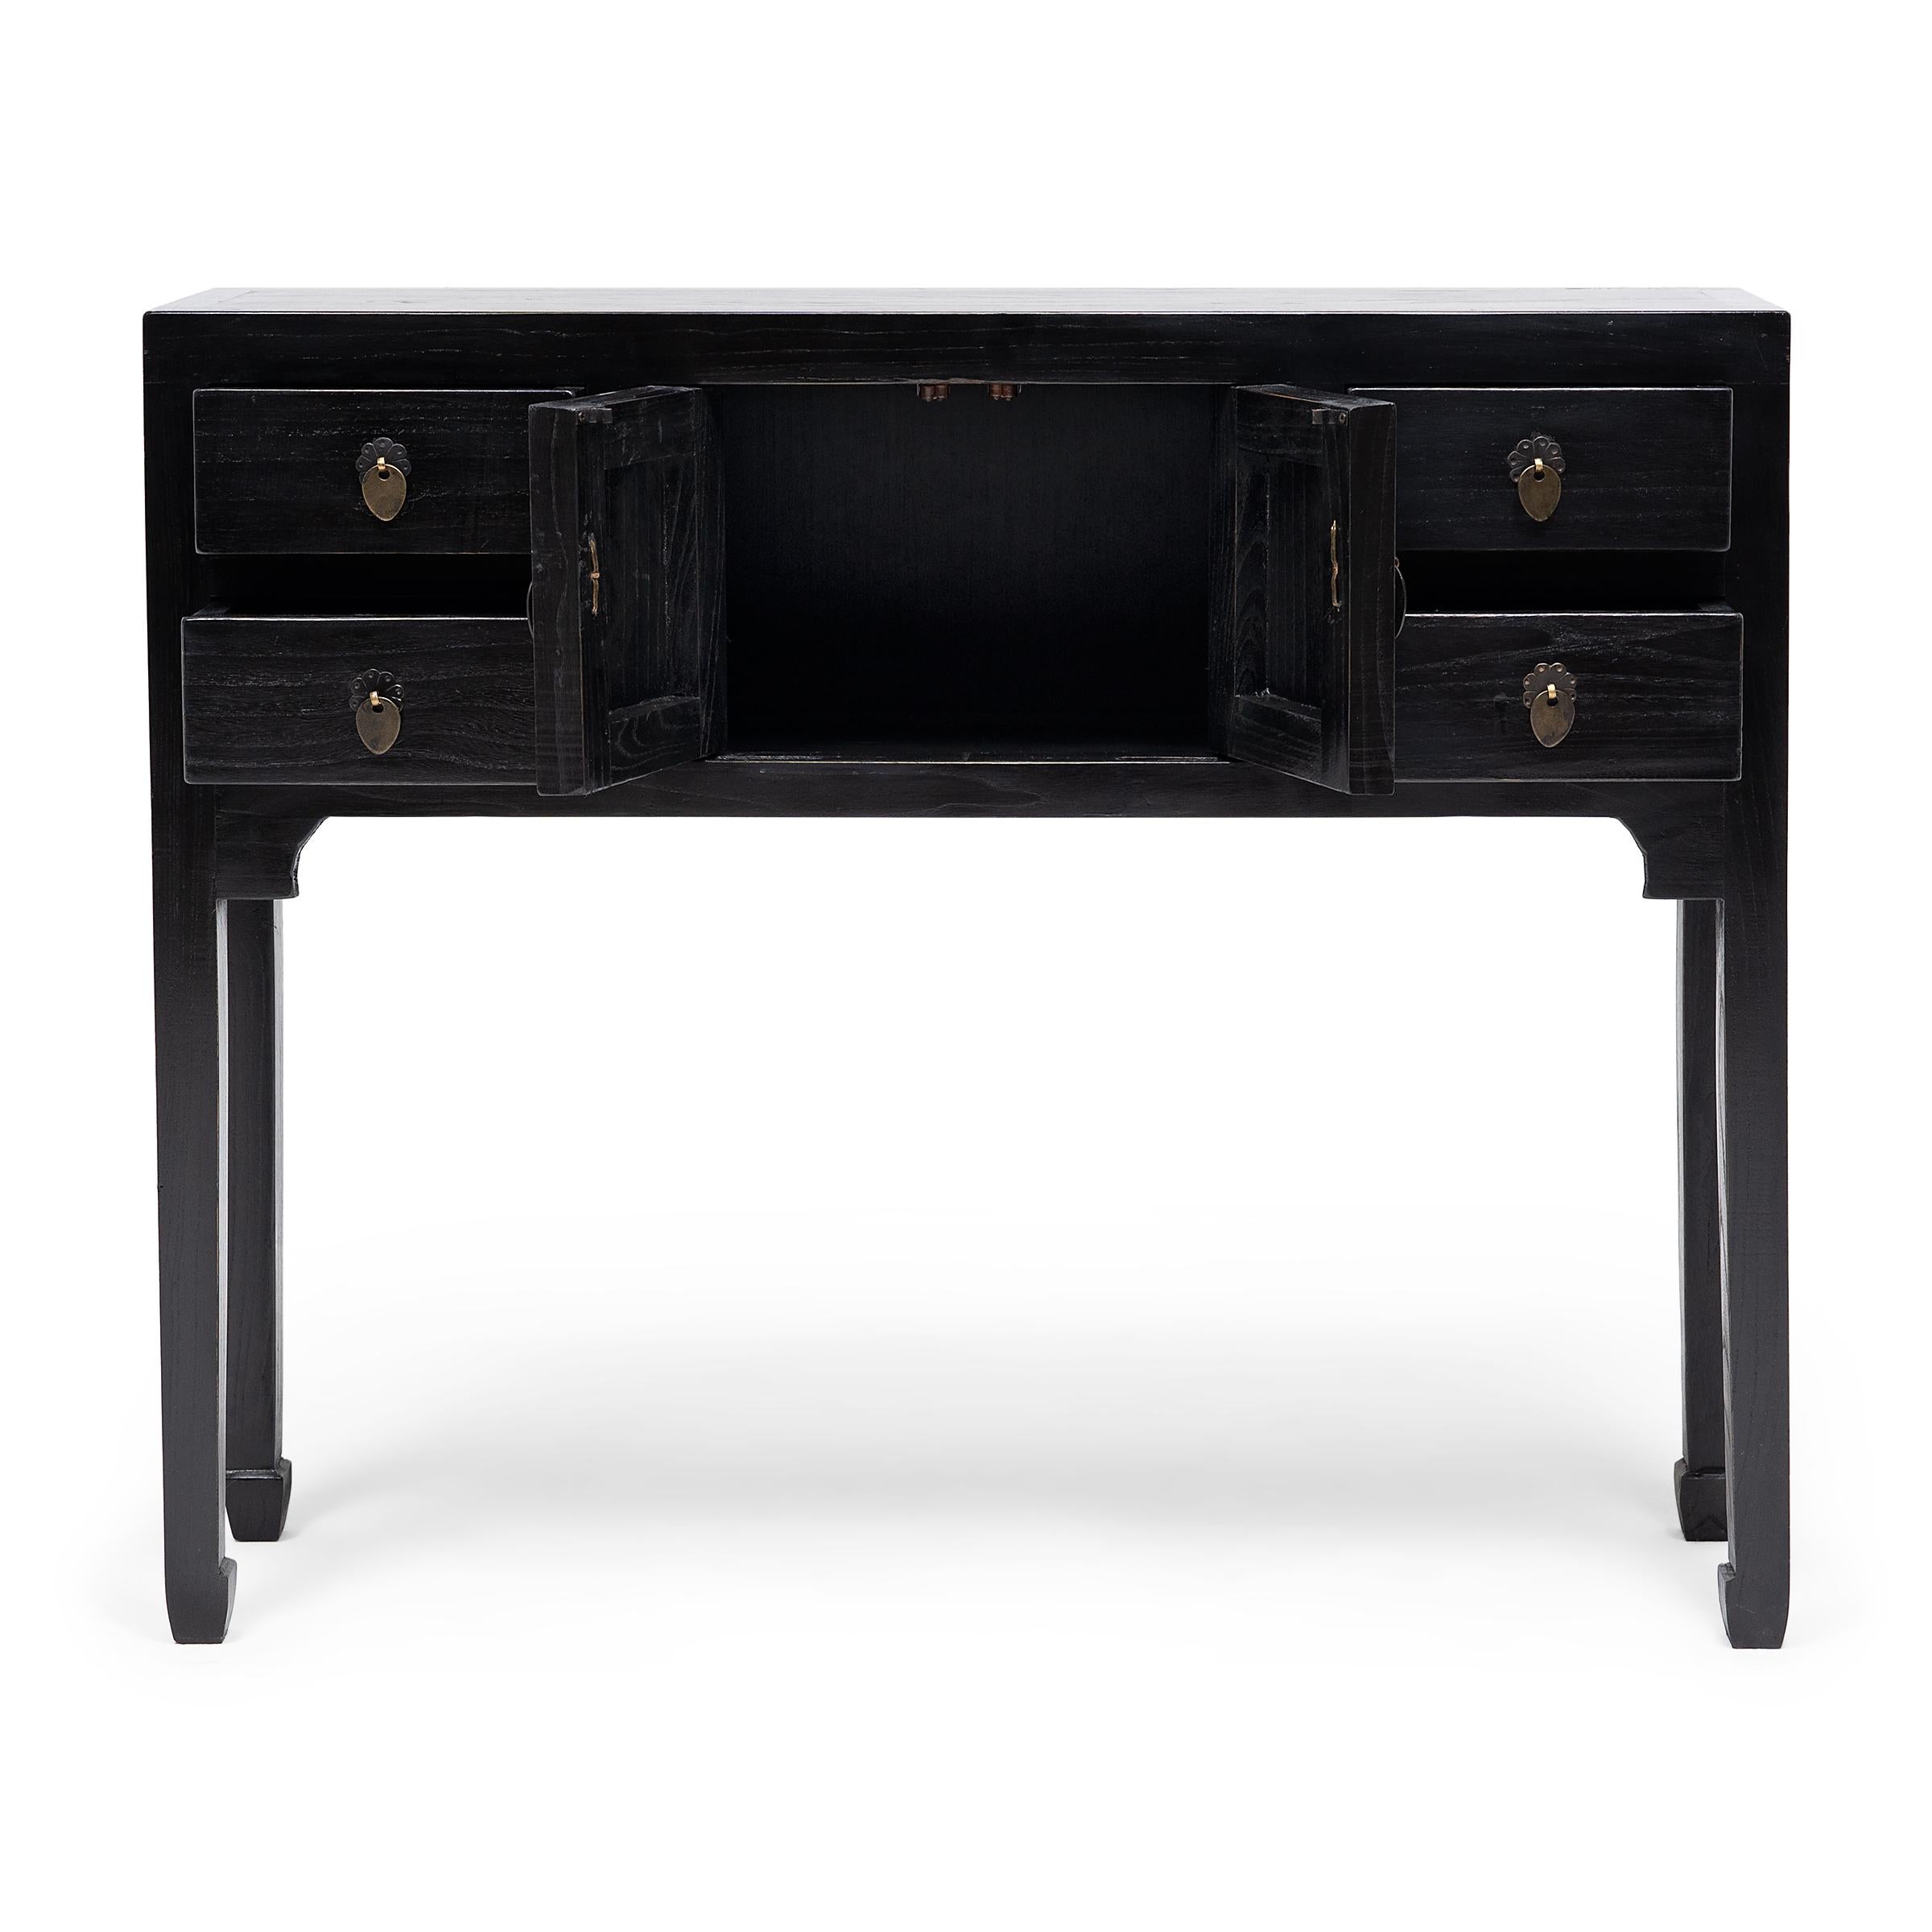 Contemporary Petite Chinese Altar Coffer